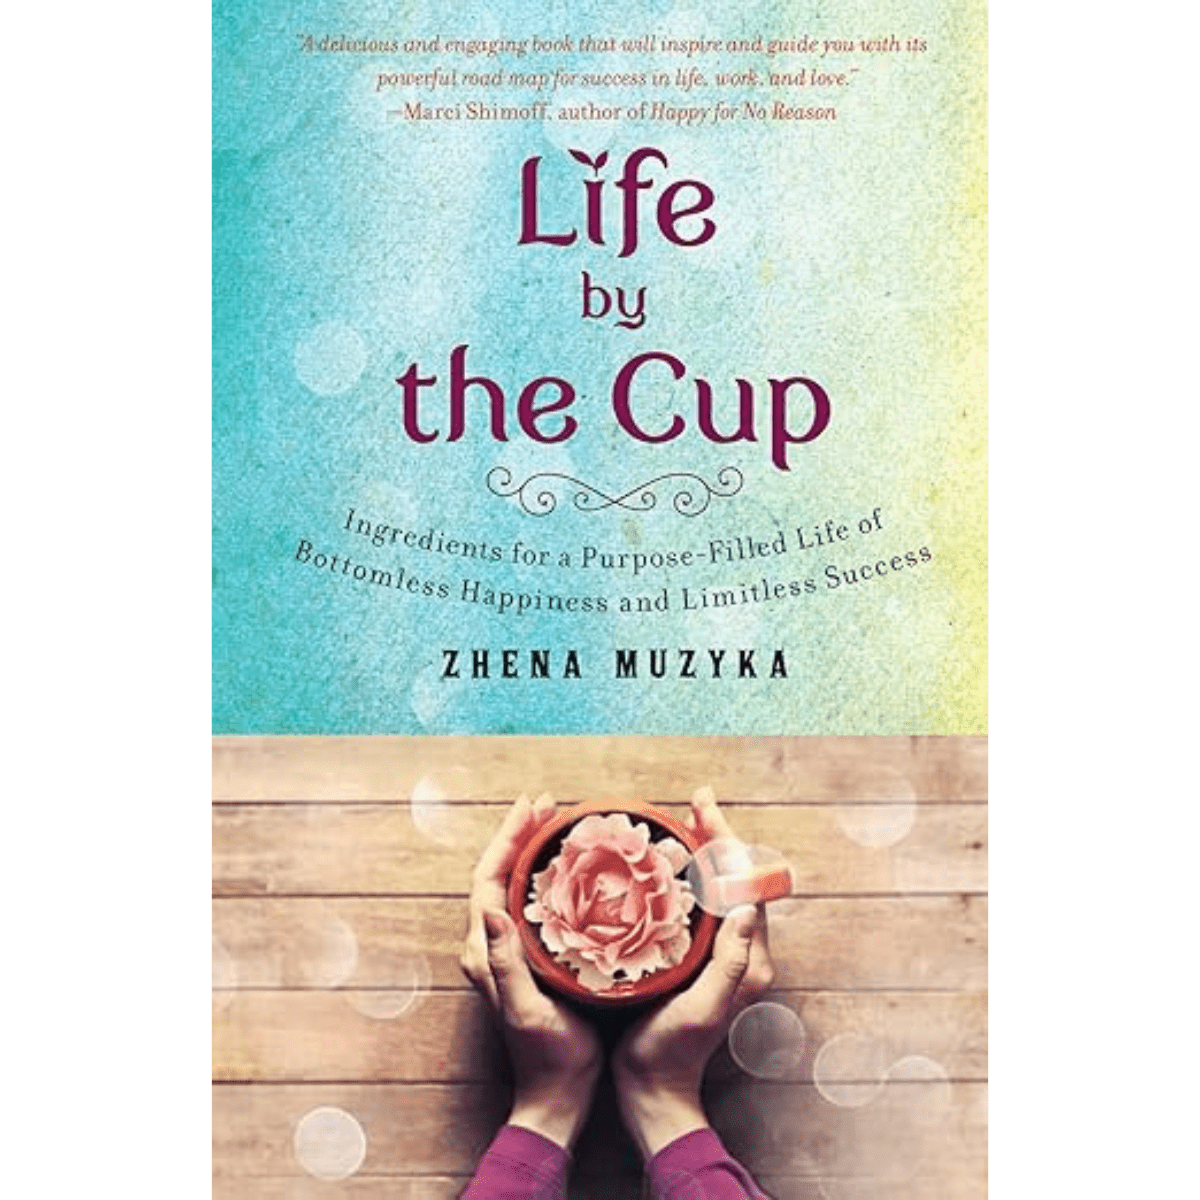 Life by the Cup by Zhena Muzyka--Magic Hour